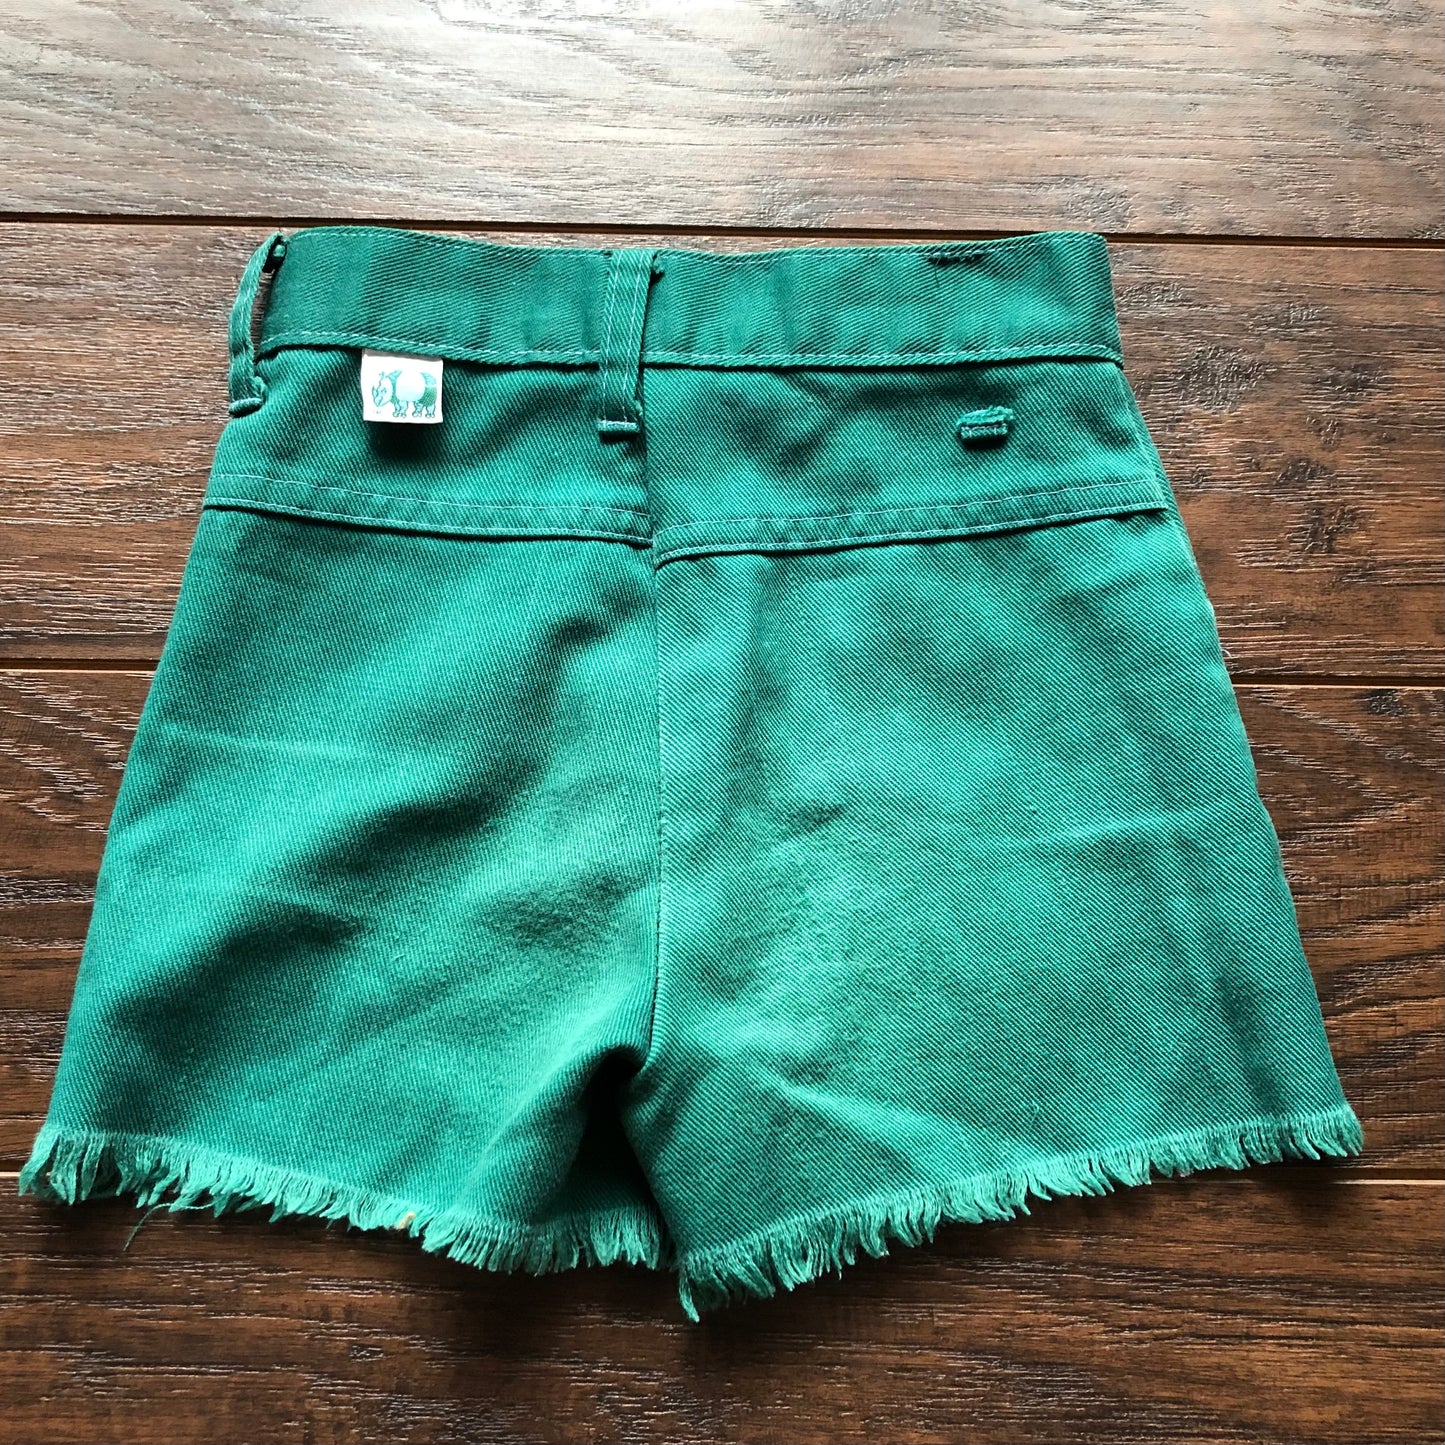 Vintage Kids JCPENNEY Penney Pet Green Cut-off Shorts